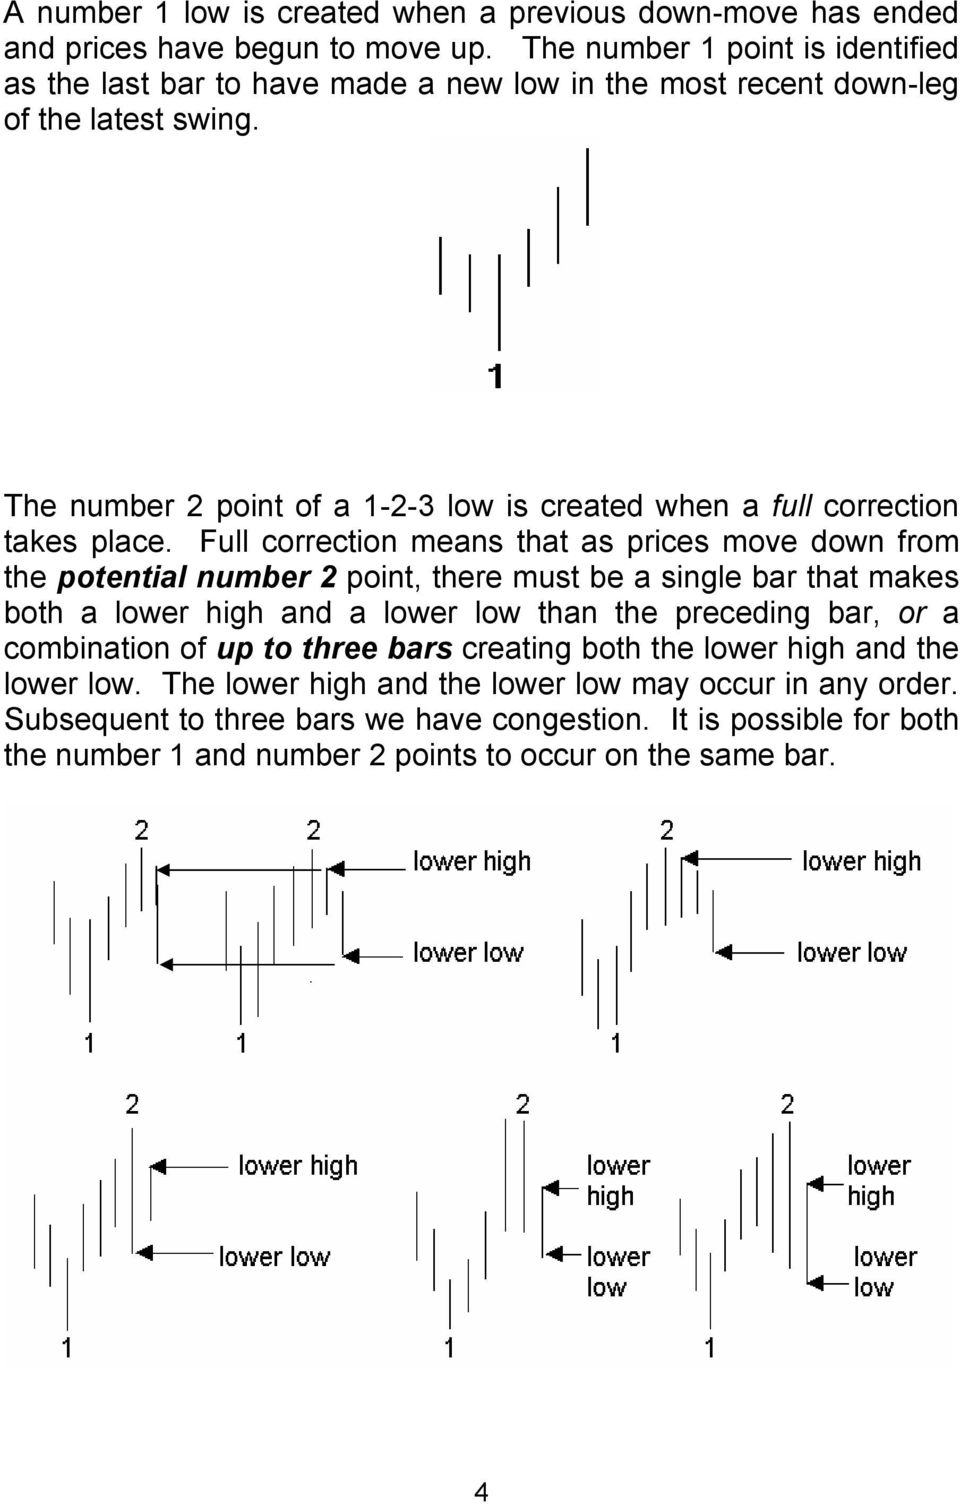 The number 2 point of a 1-2-3 low is created when a full correction takes place.